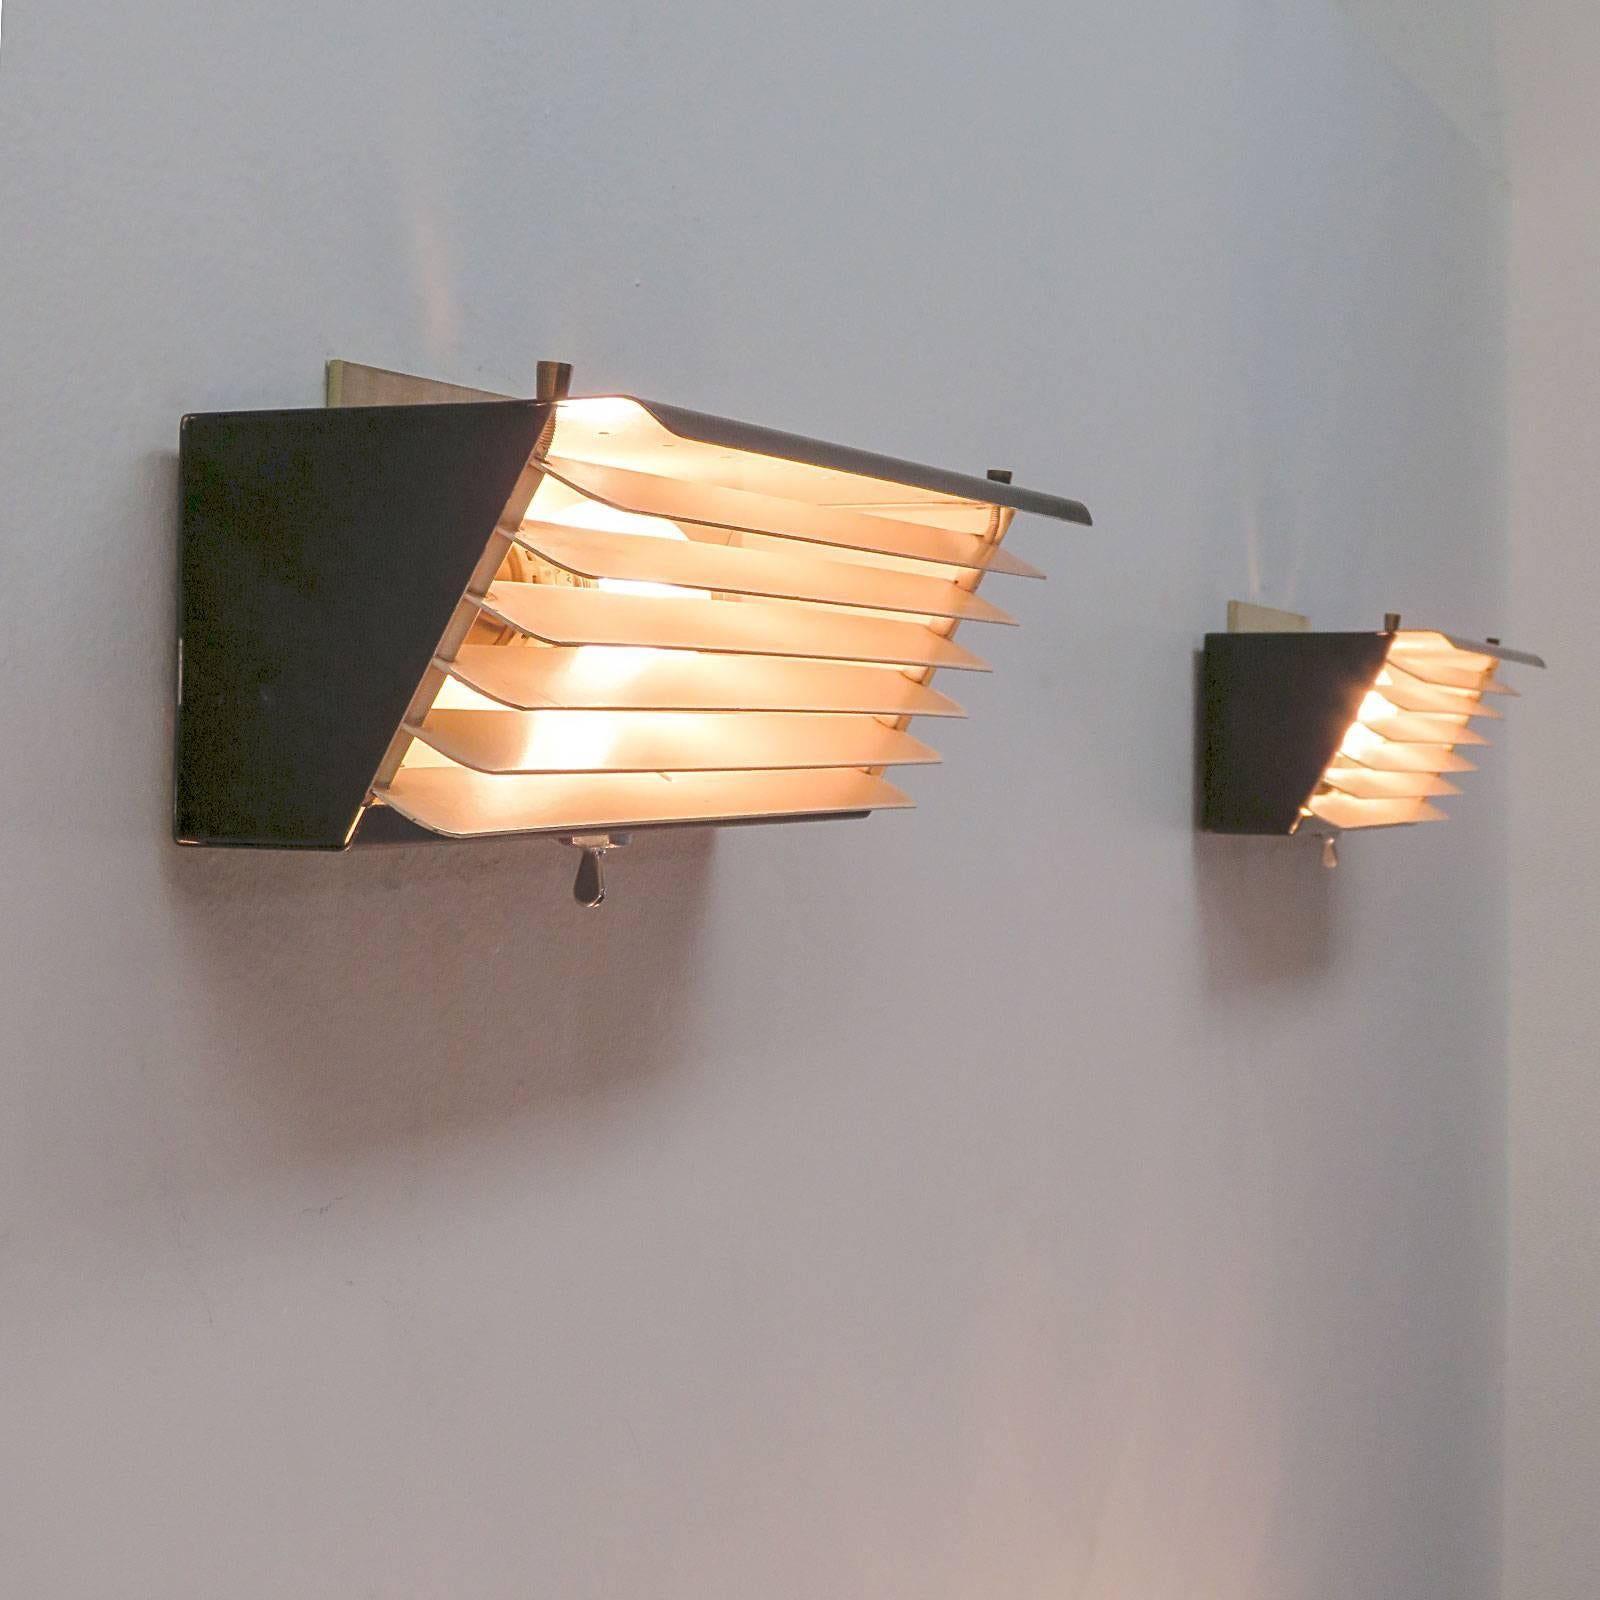 Jacques Biny for Luminalite Edition Model '212' Wall Lights 1